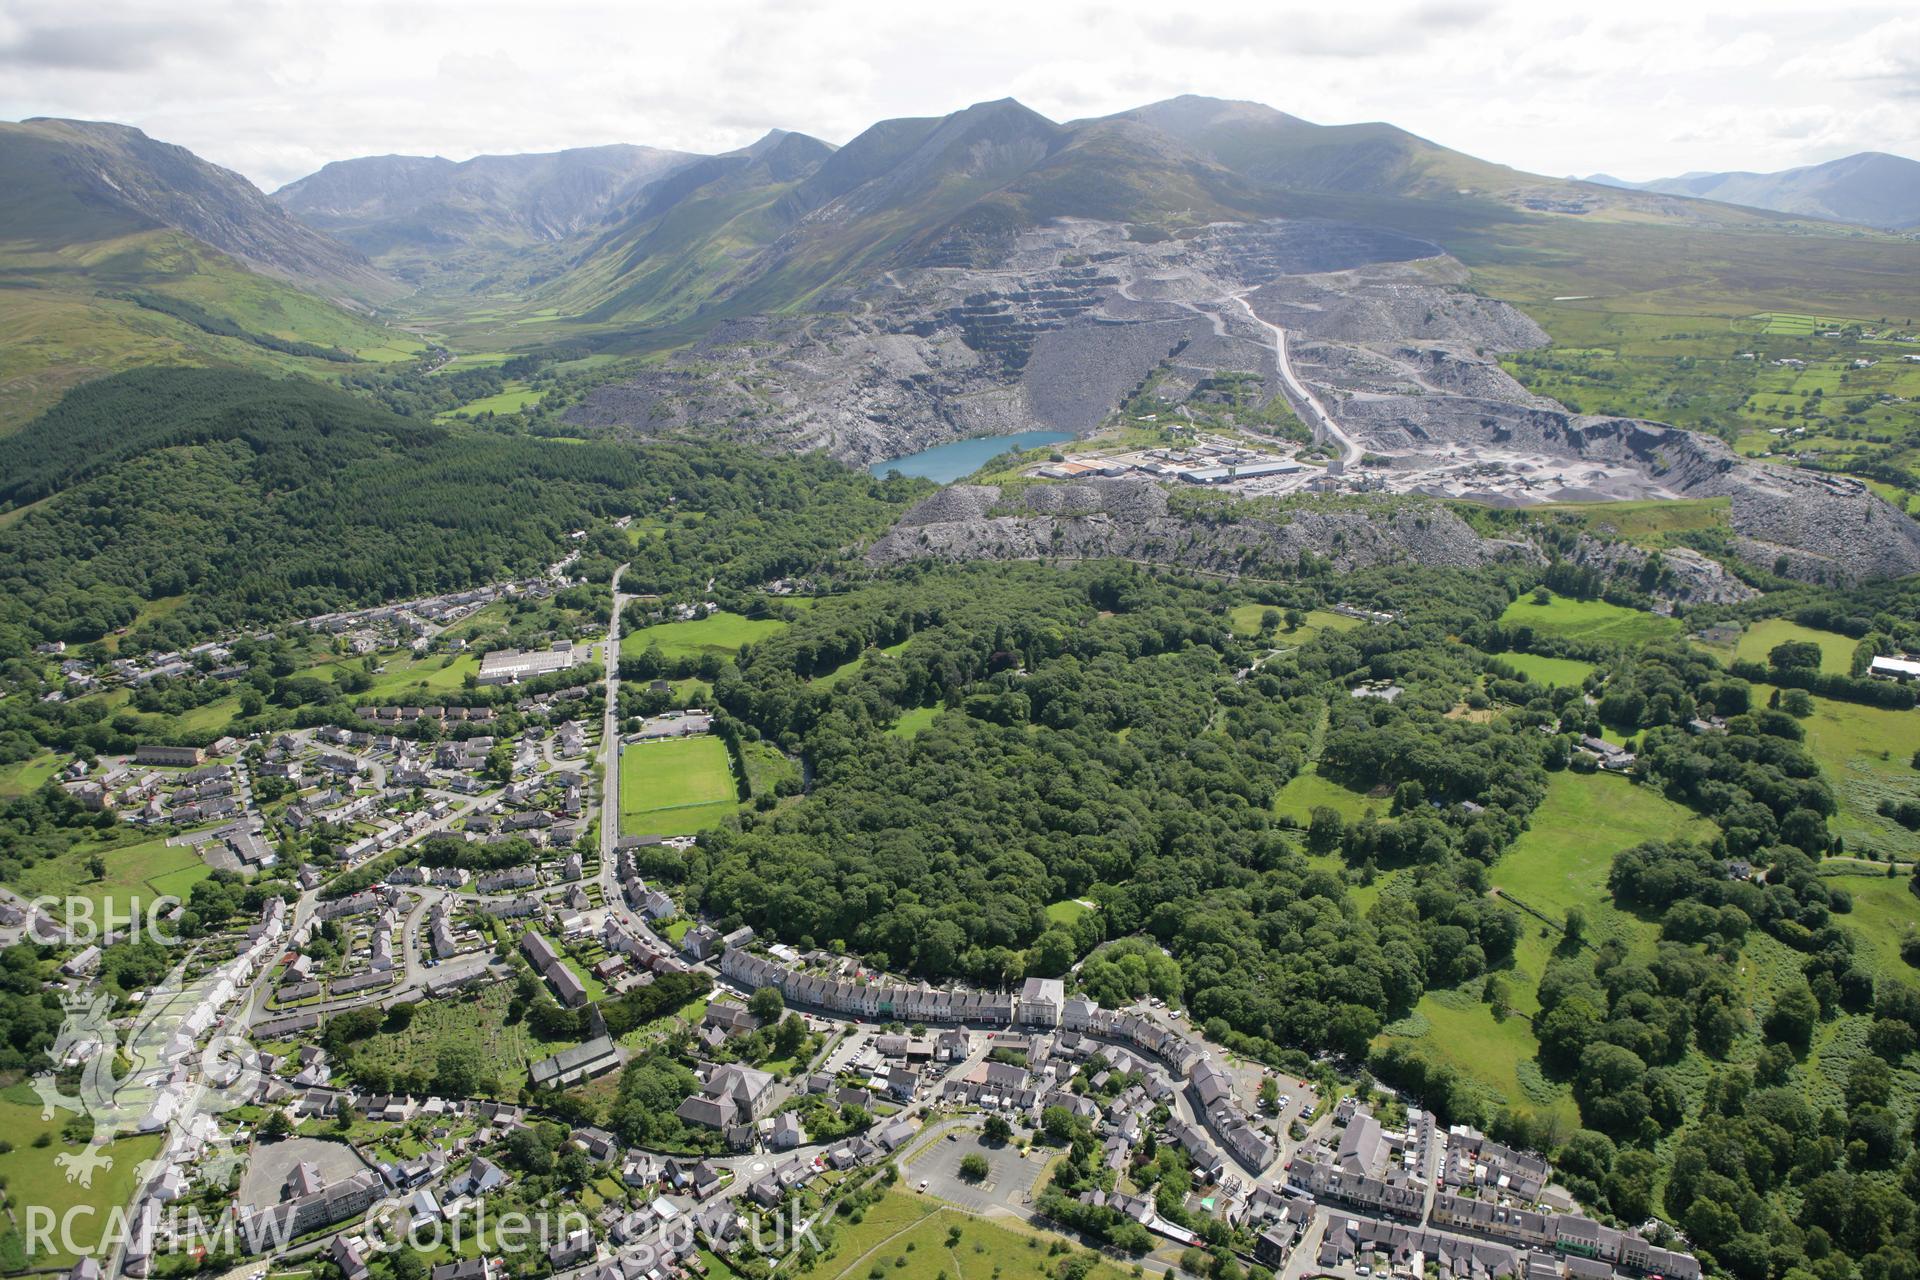 RCAHMW colour oblique photograph of Bethesda, town, landscape south to Penrhyn Quarry. Taken by Toby Driver on 20/07/2011.